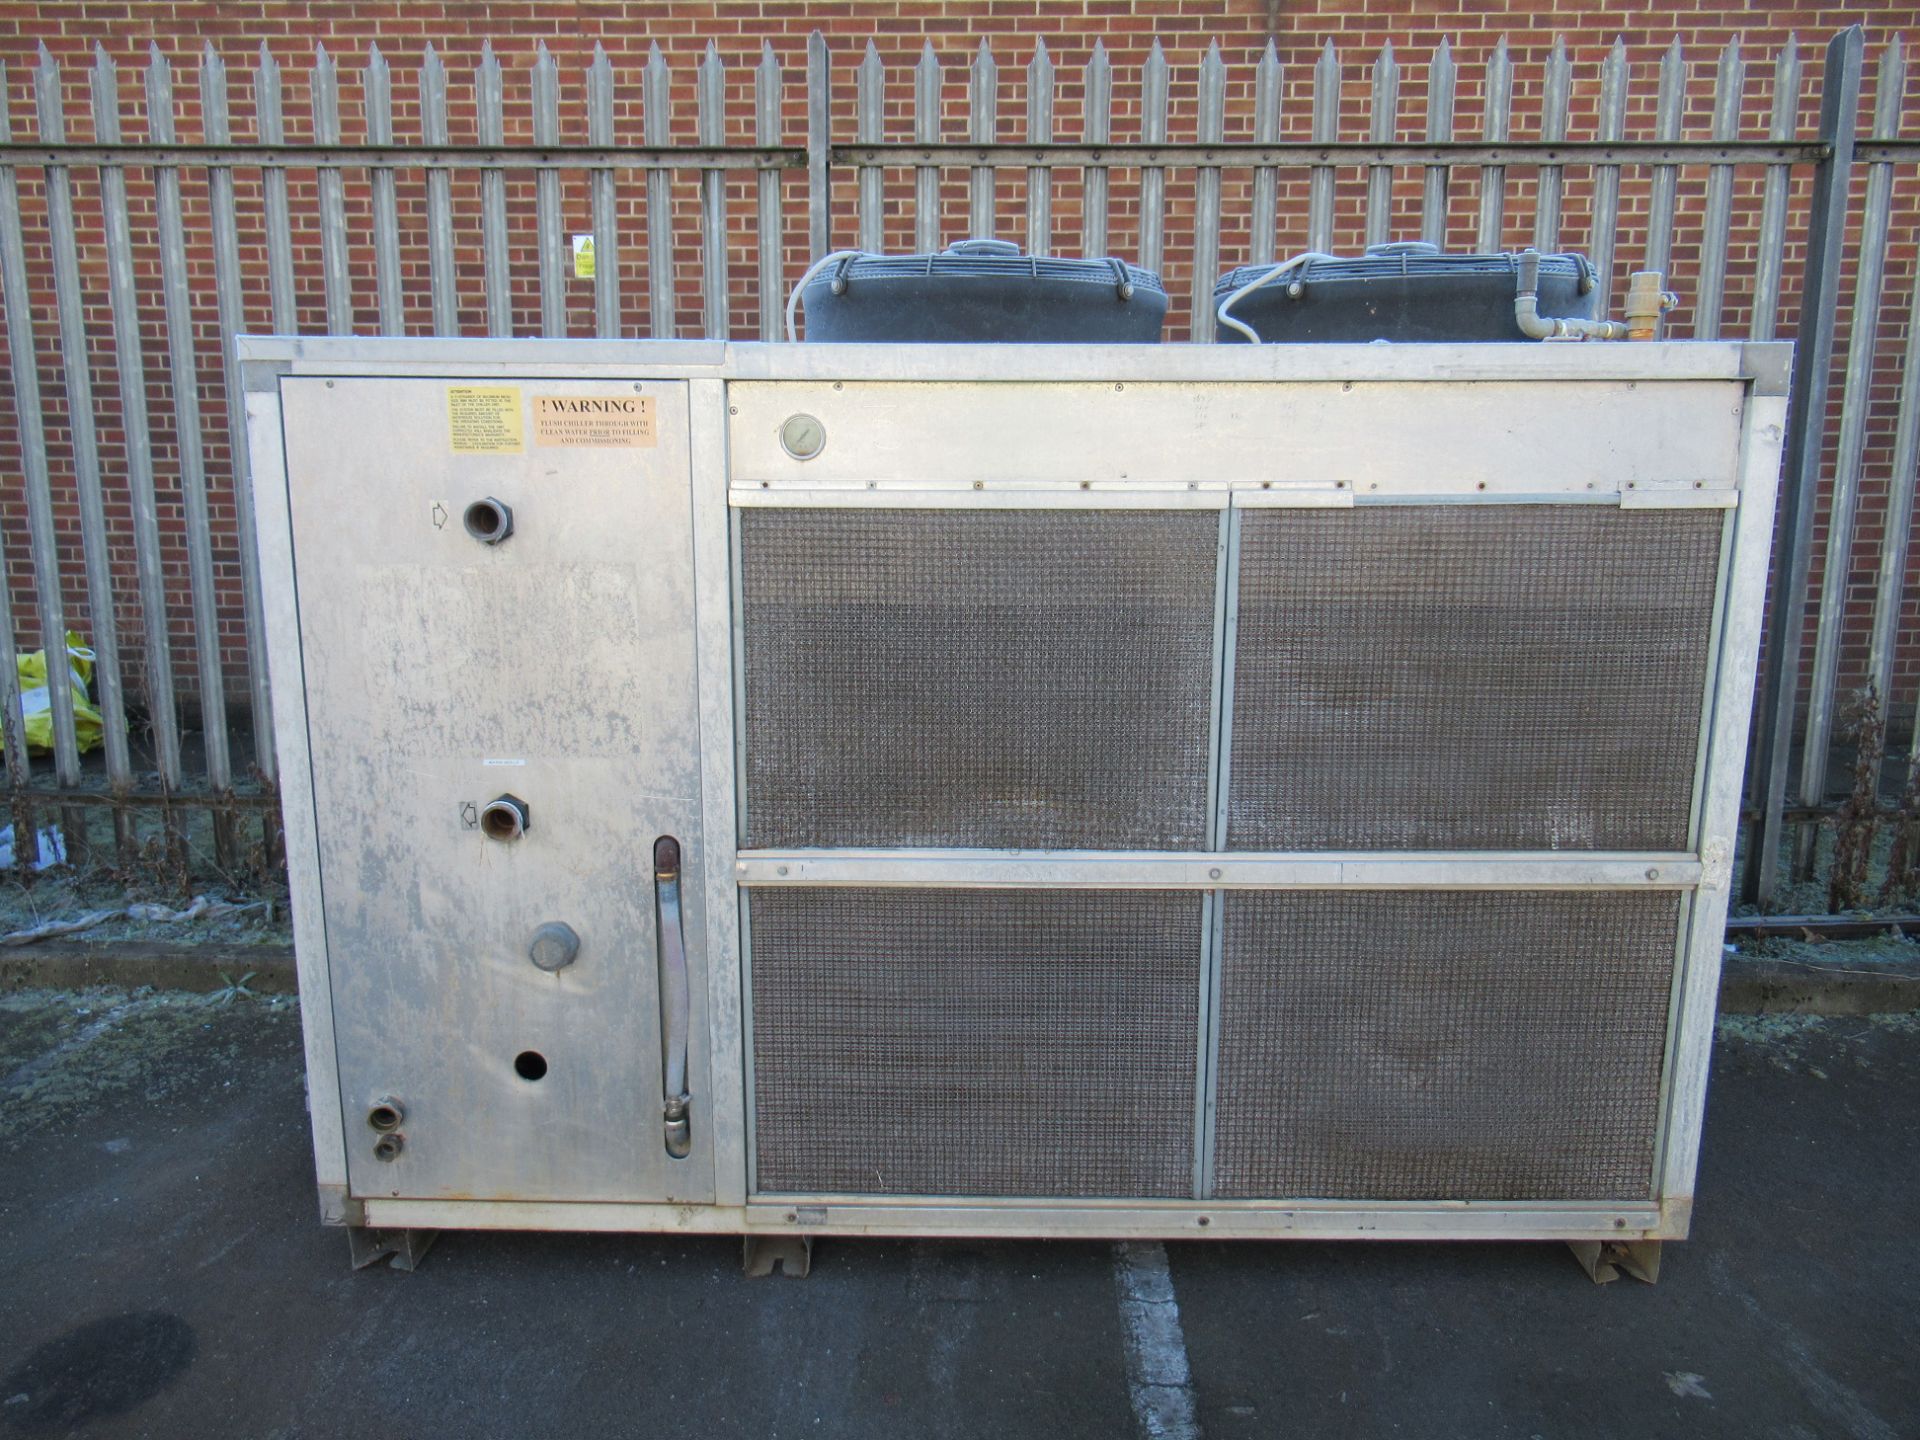 Rhoss industrial water chiller, model number CWA/EX57,66 kW cooling capacity